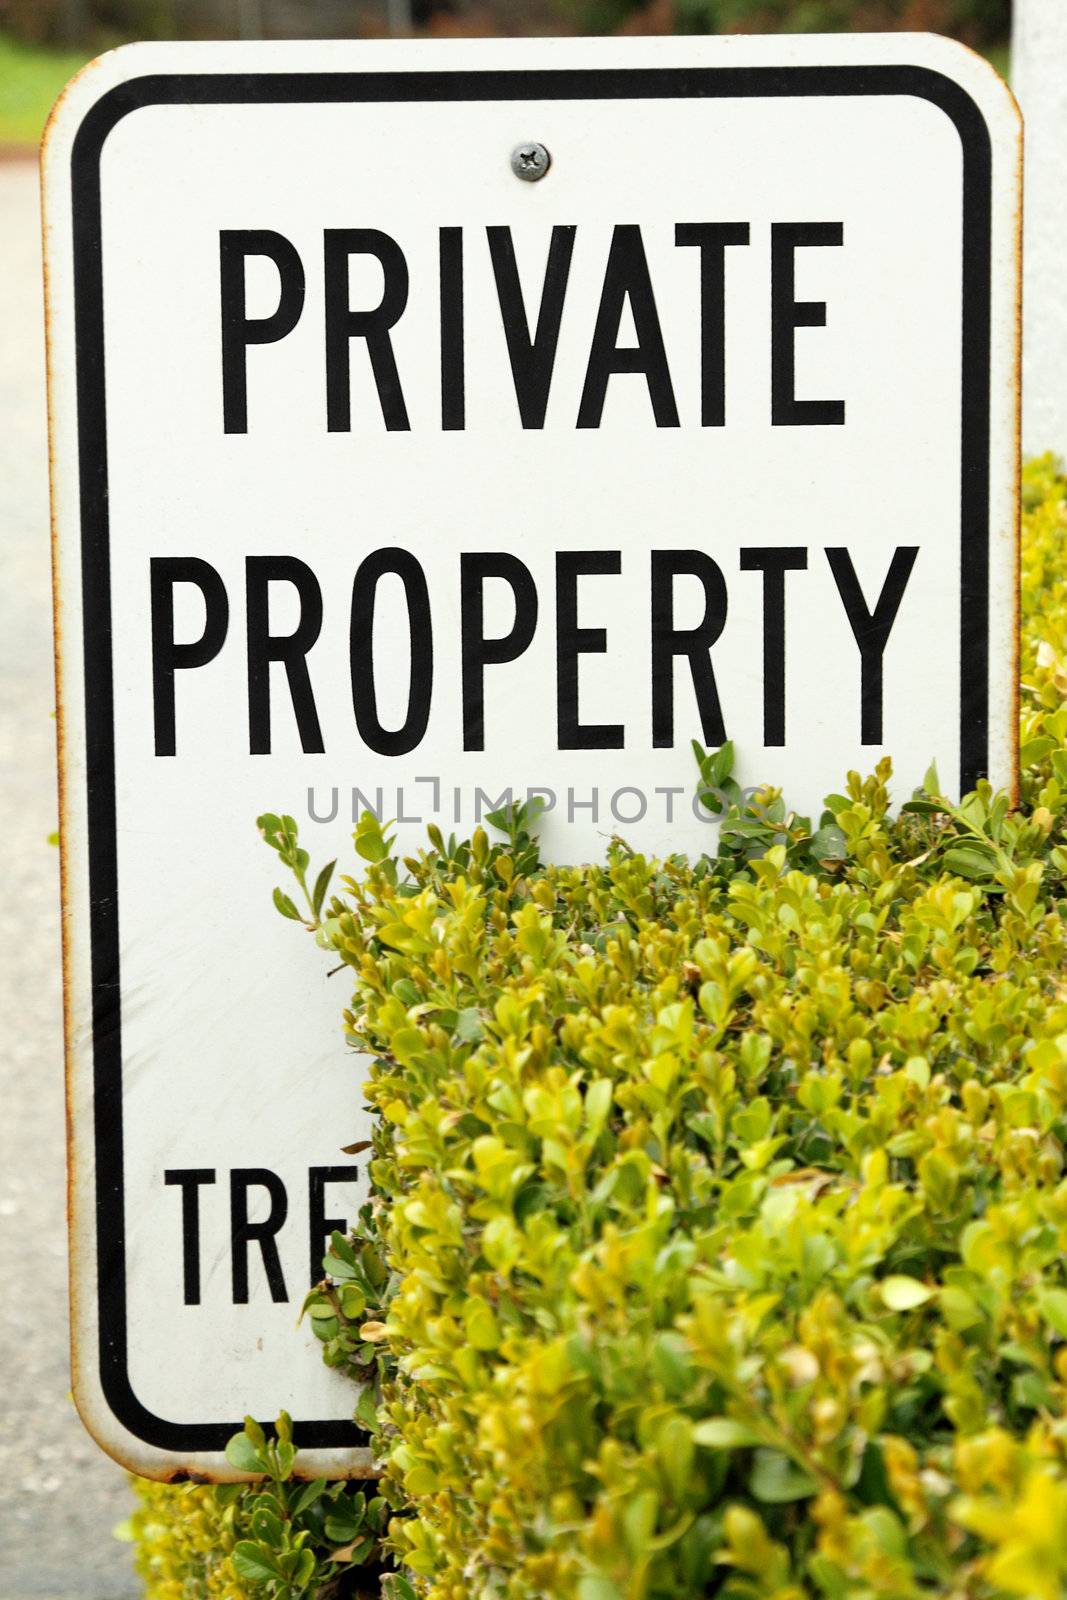 Private property sign by pulen